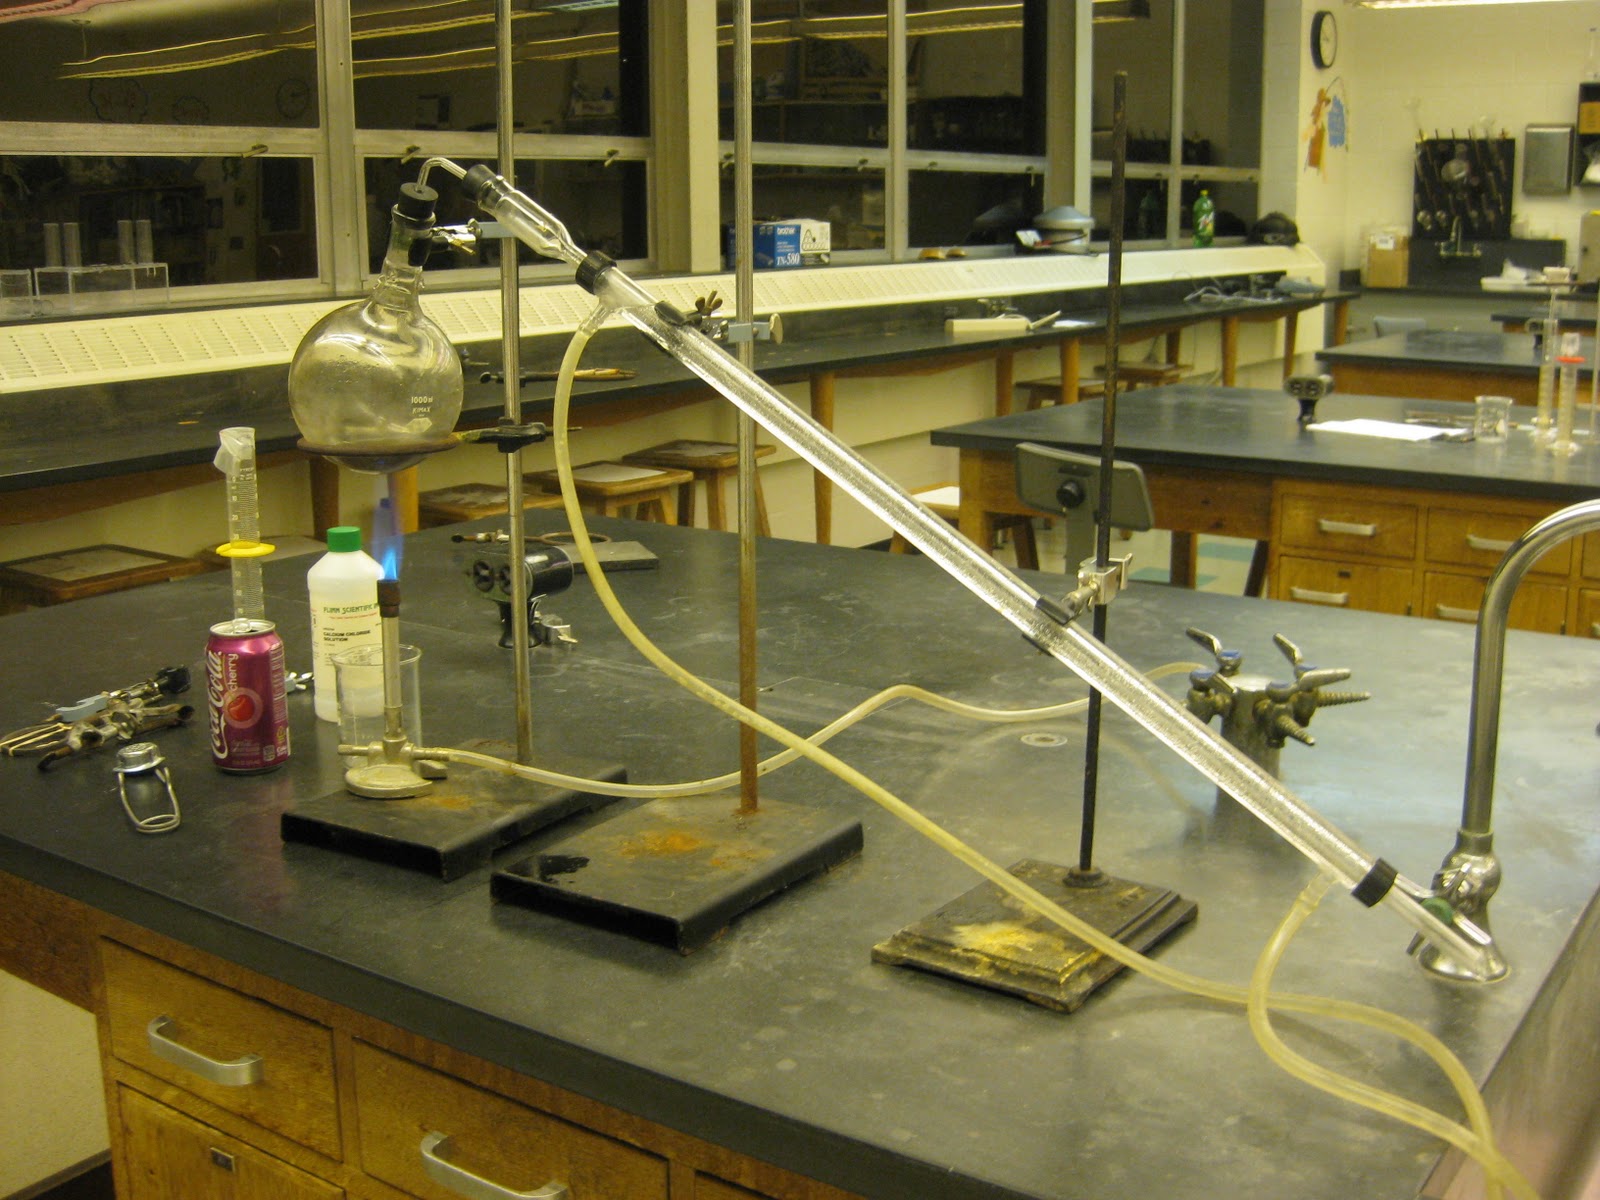 The Art of Teaching Science: Simple Distillation is Not So Simple